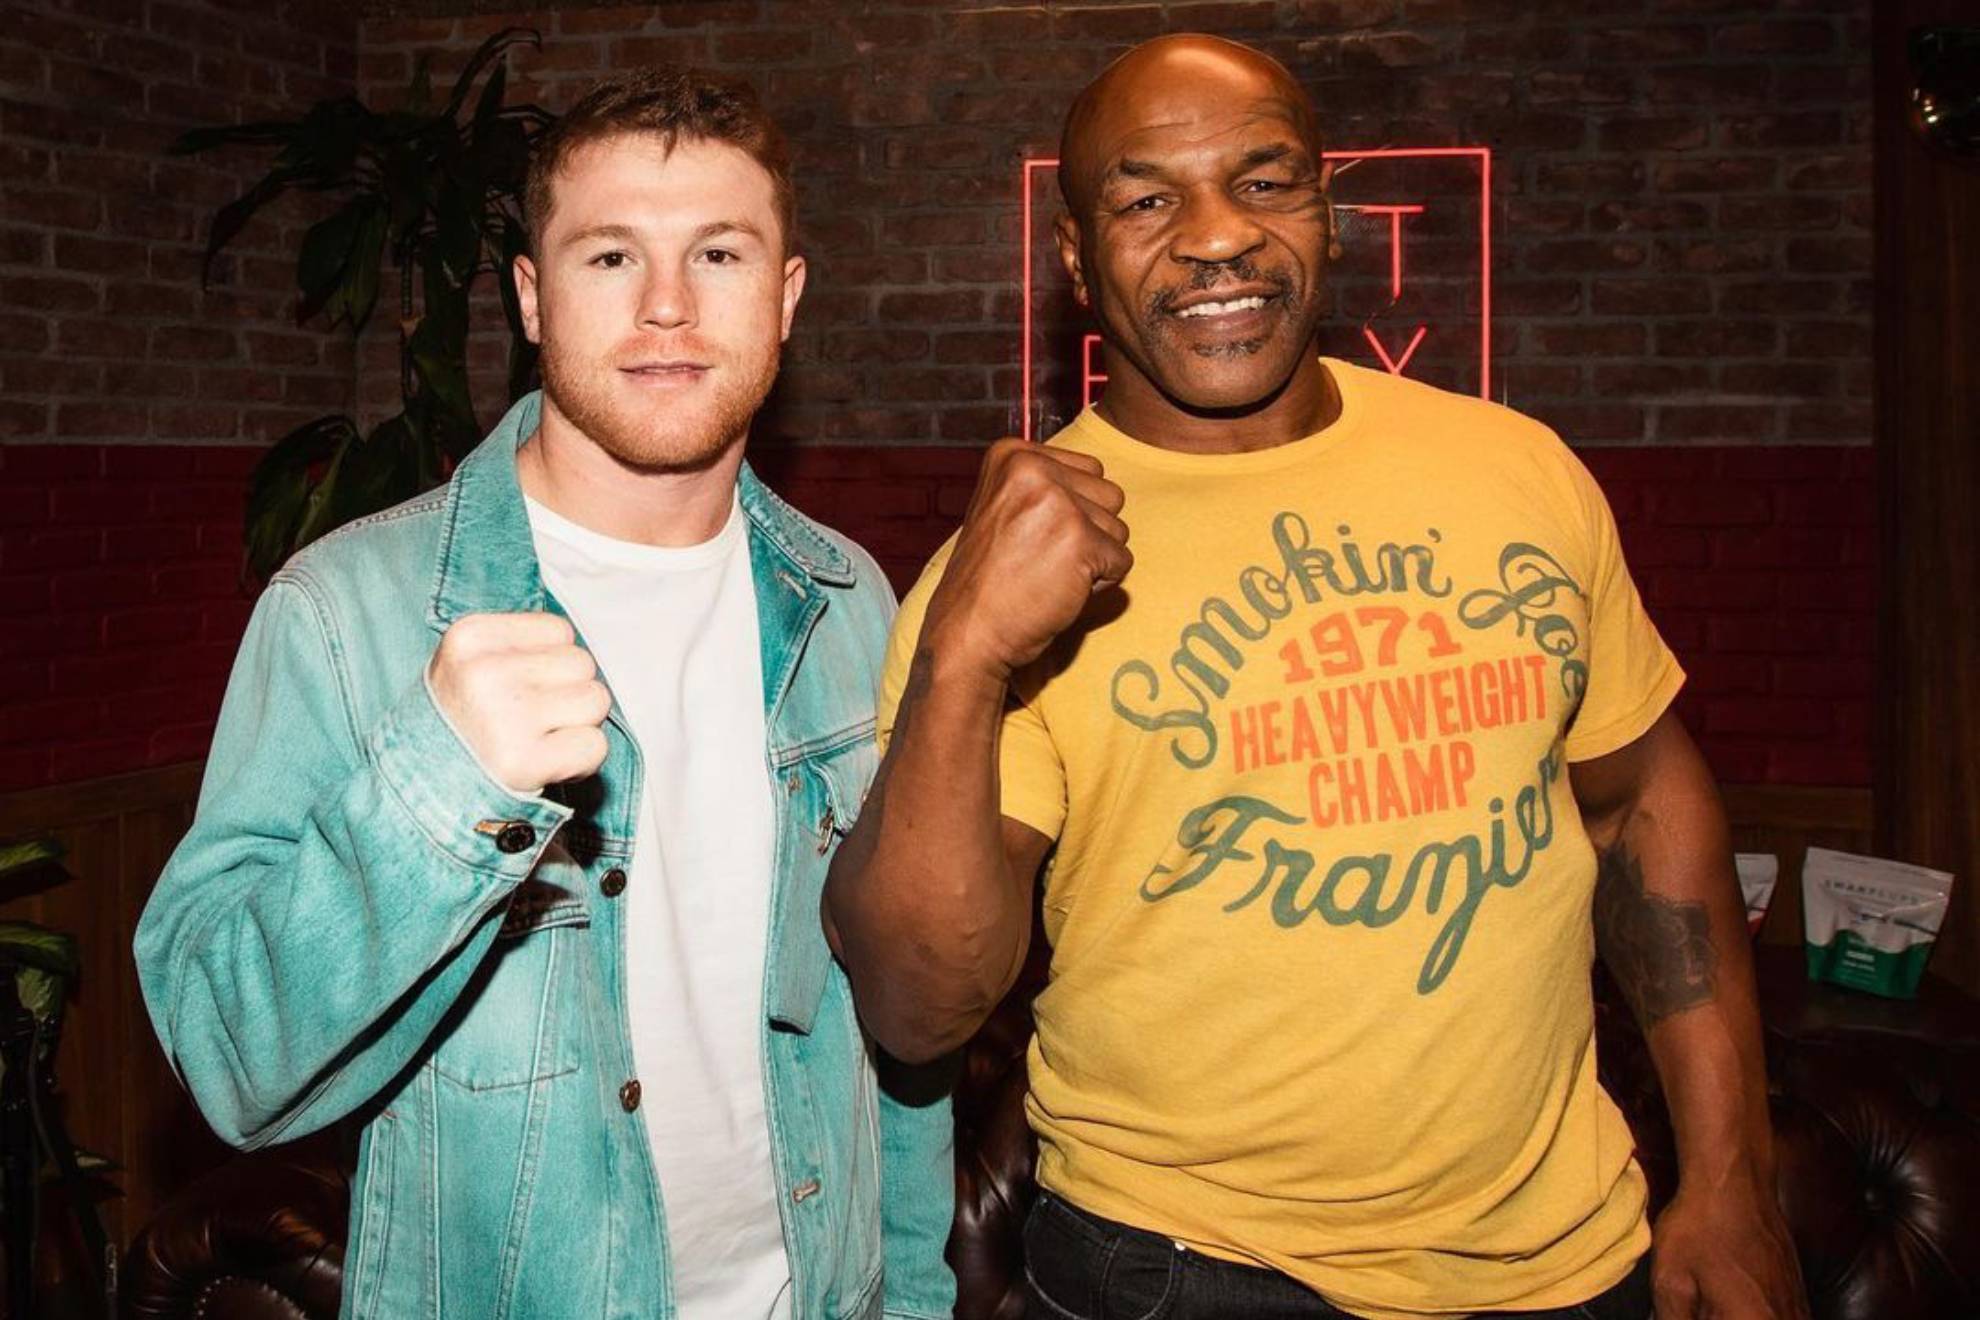 bao mike tyson suddenly surprised everyone by giving canelo alvarez a friend for his birthday and thanking him for helping him find himself 652e5af1f3cc0 Mike Tyson Suddenly Surprised Everyone By Giving Canelo Alvarez A Friend For His Birthday And Thanking Him For Helping Him Find Himself.